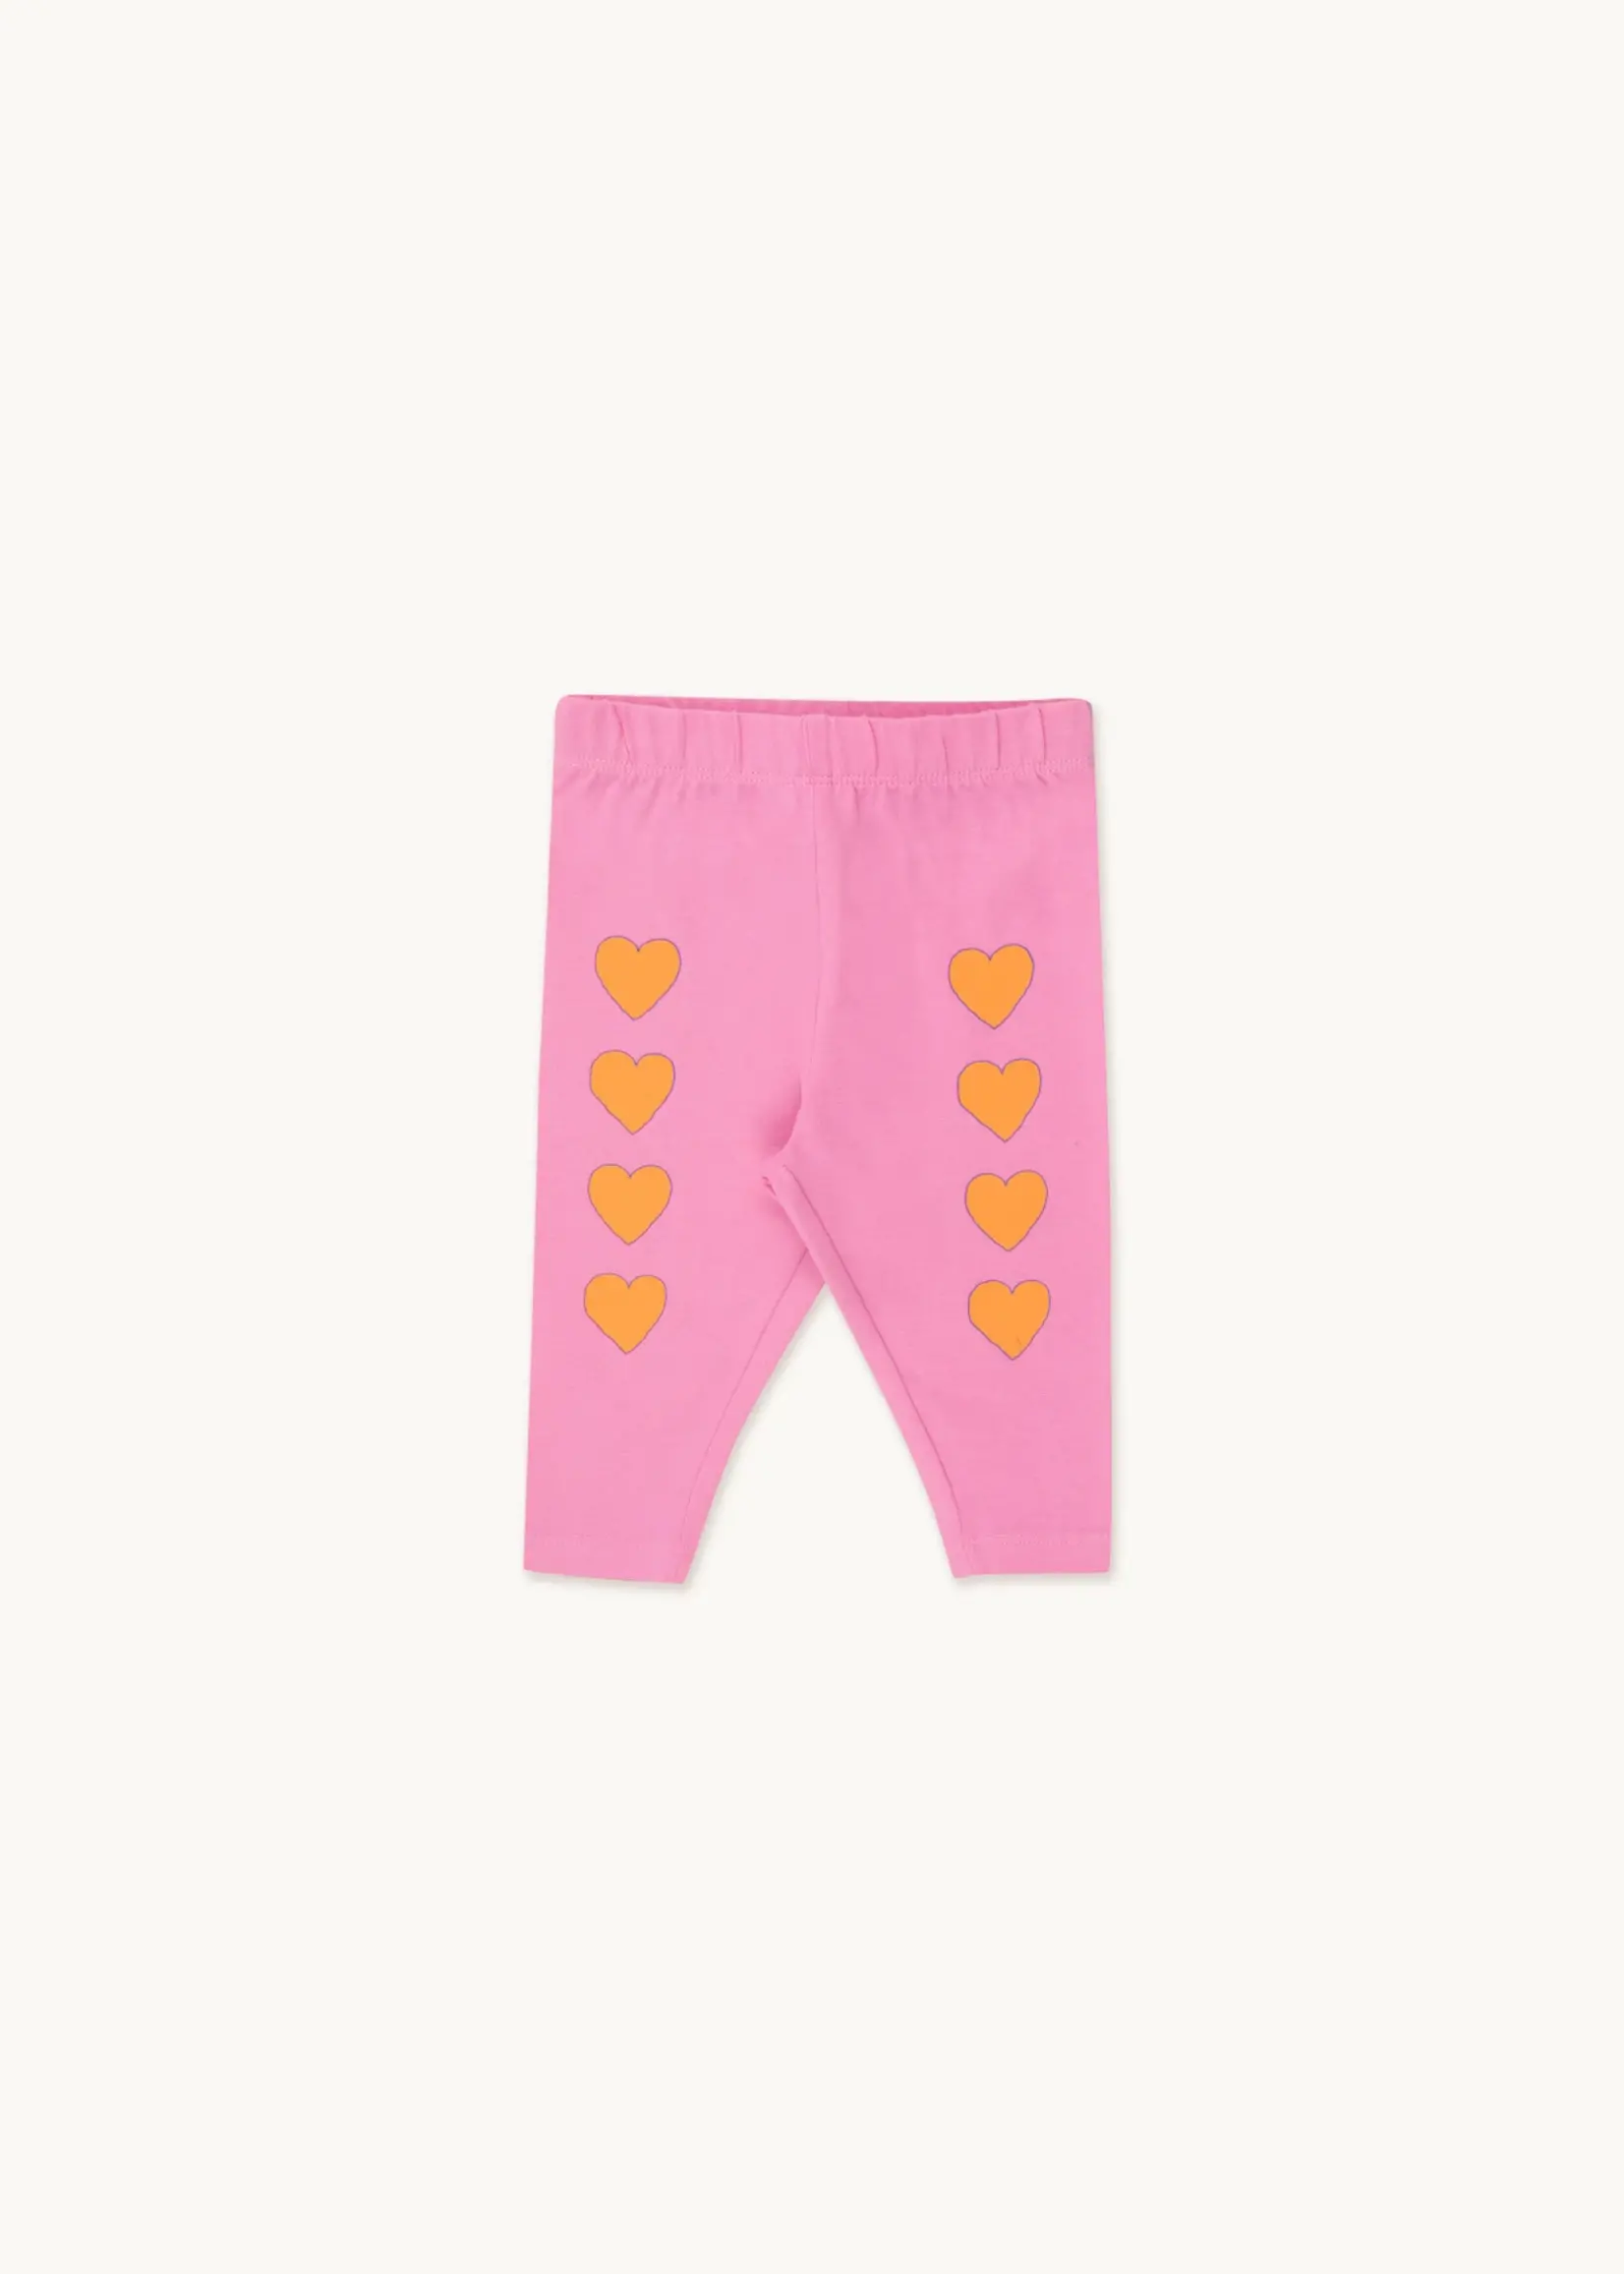 Tiny Cottons Hearts baby pant pink - Tiny cottons